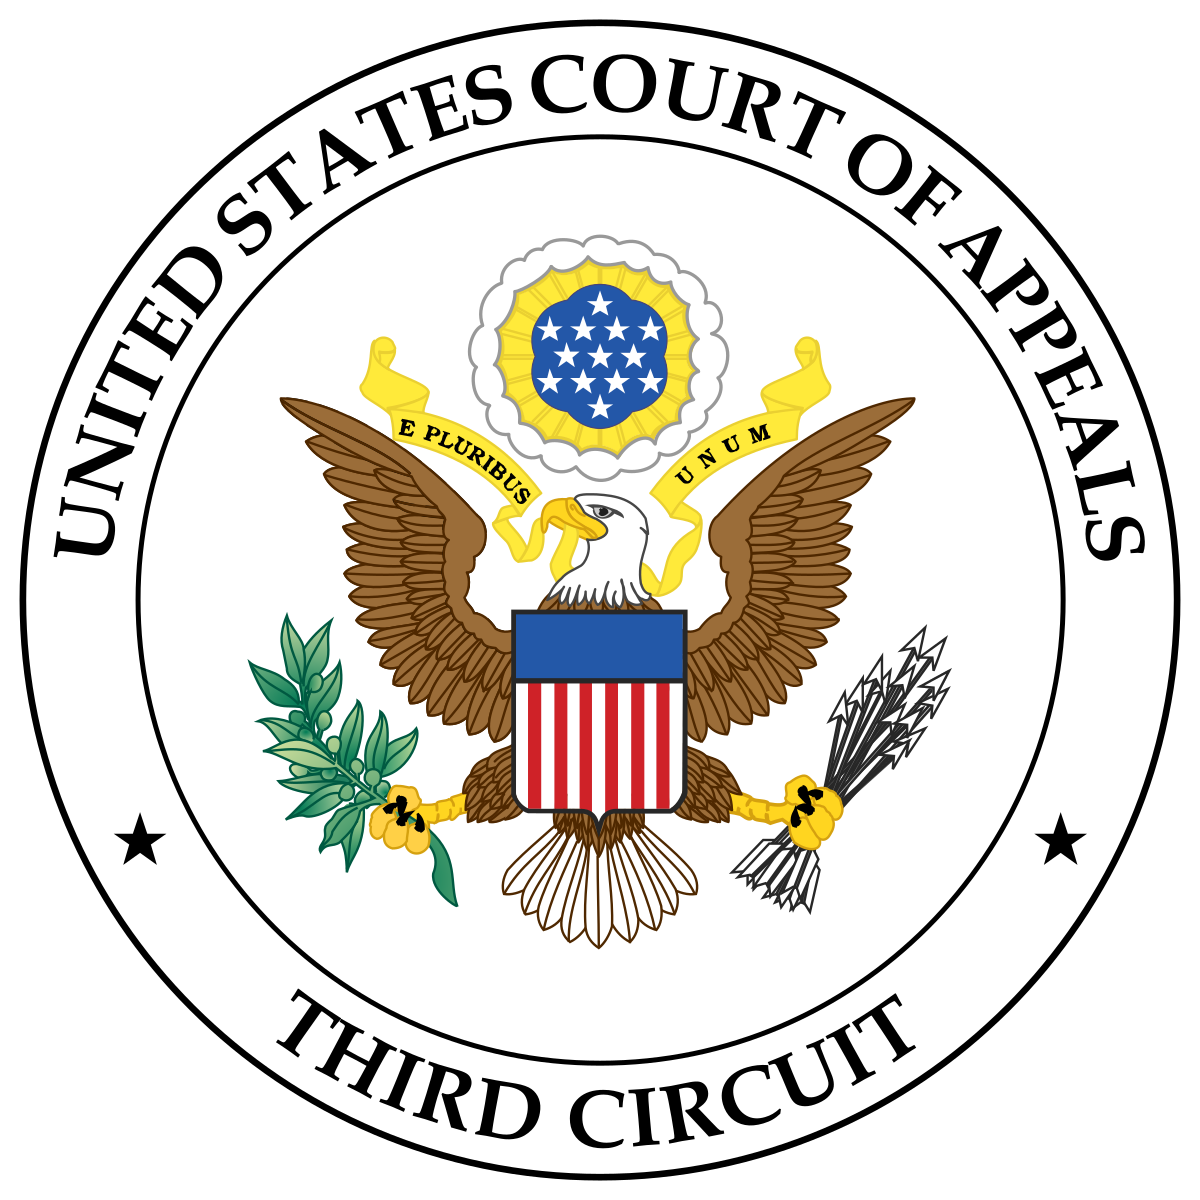 United States Court of Appeals for the Third Circuit   Wikipedia